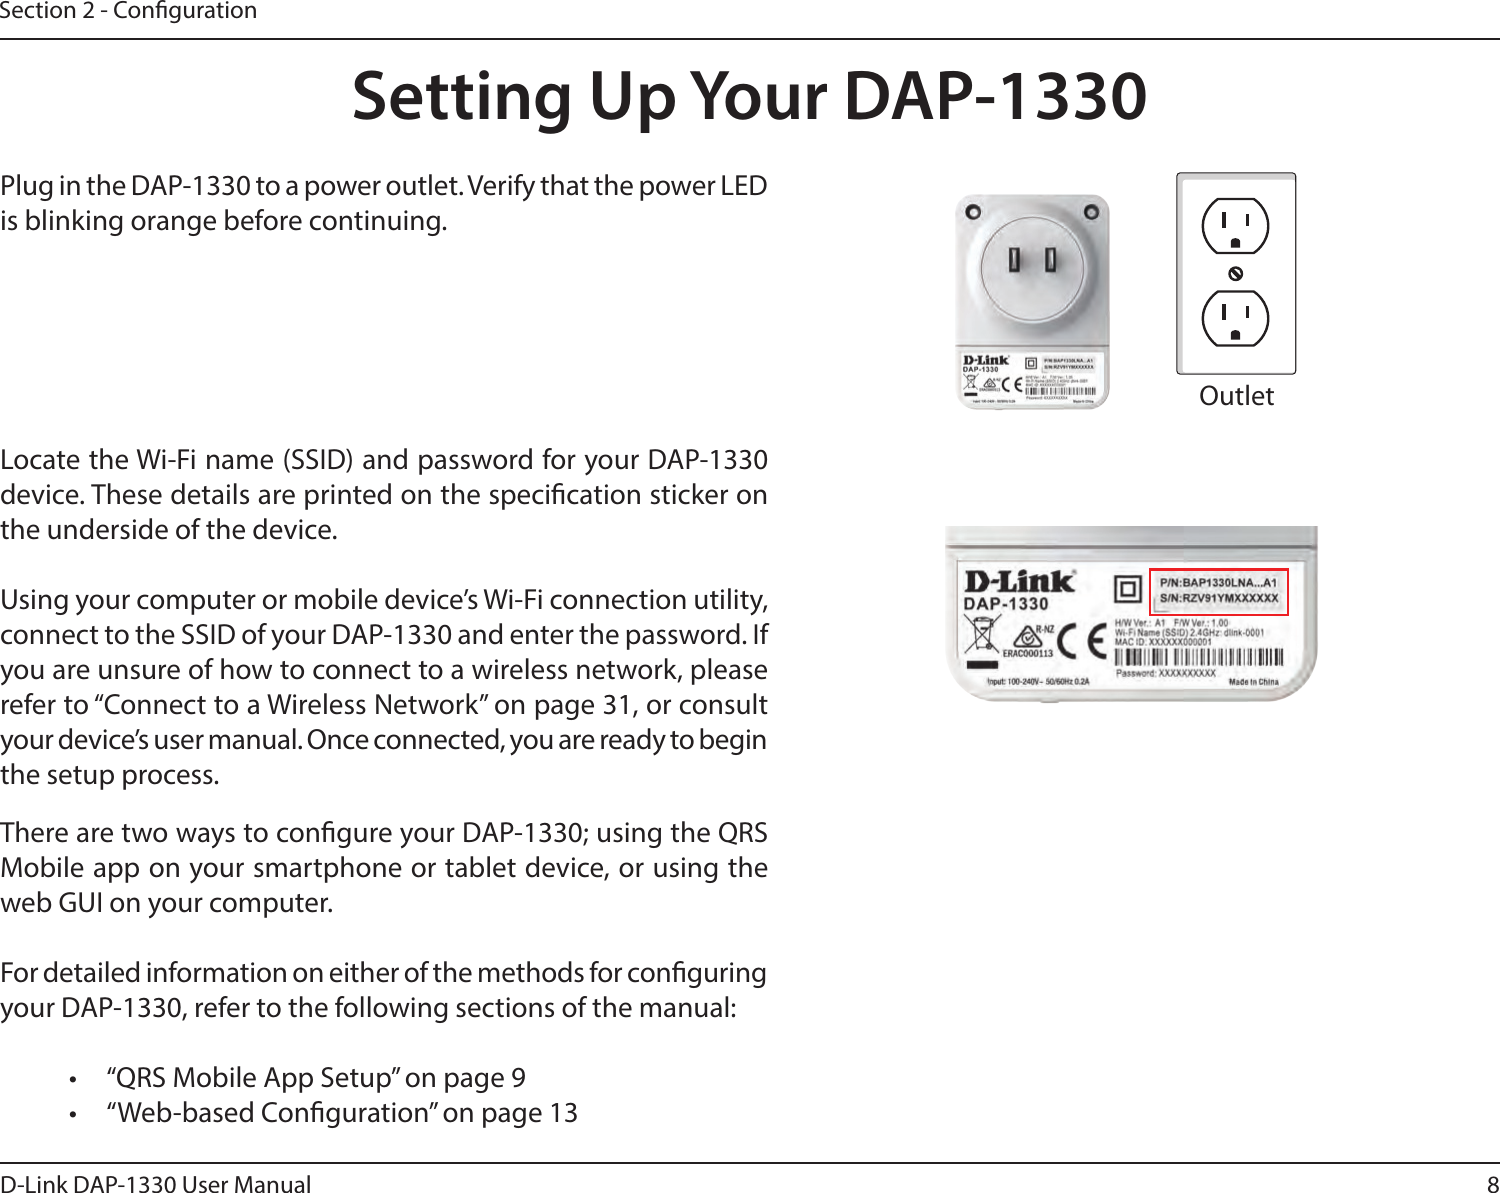 8D-Link DAP-1330 User ManualSection 2 - CongurationSetting Up Your DAP-1330Plug in the DAP-1330 to a power outlet. Verify that the power LED is blinking orange before continuing.OutletEthernetThere are two ways to congure your DAP-1330; using the QRS Mobile app on your smartphone or tablet device, or using the web GUI on your computer.For detailed information on either of the methods for conguring your DAP-1330, refer to the following sections of the manual:•  “QRS Mobile App Setup” on page 9•  “Web-based Conguration” on page 13Locate the Wi-Fi name (SSID) and password for your DAP-1330 device. These details are printed on the specication sticker on the underside of the device. Using your computer or mobile device’s Wi-Fi connection utility, connect to the SSID of your DAP-1330 and enter the password. If you are unsure of how to connect to a wireless network, please refer to “Connect to a Wireless Network” on page 31, or consult your device’s user manual. Once connected, you are ready to begin the setup process. 